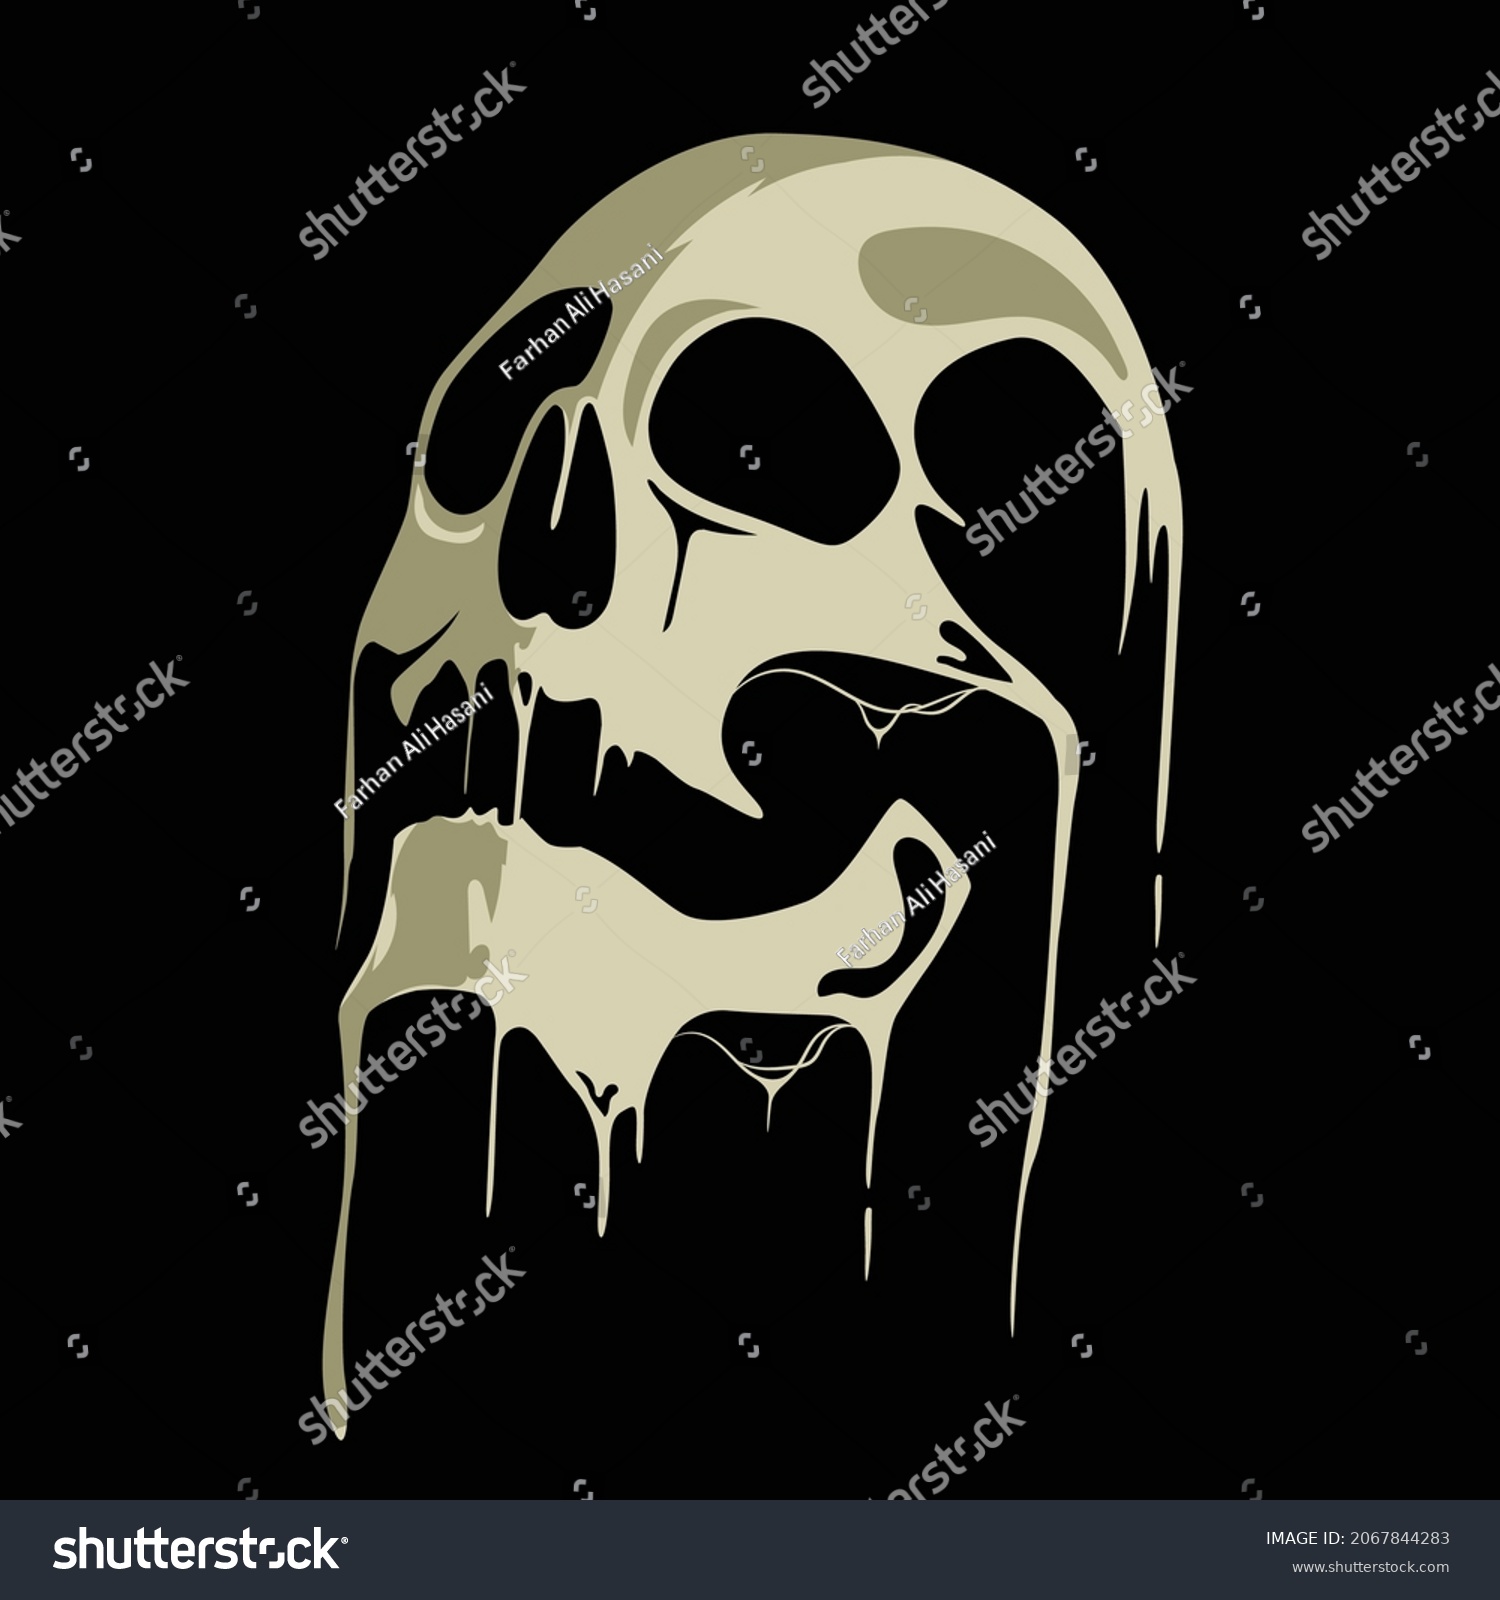 SVG of scary vintage melting skull of a human. Can be used in scary art projects posters or banners, gaming logo or many other spooky designs. Perfect for Halloween night. svg